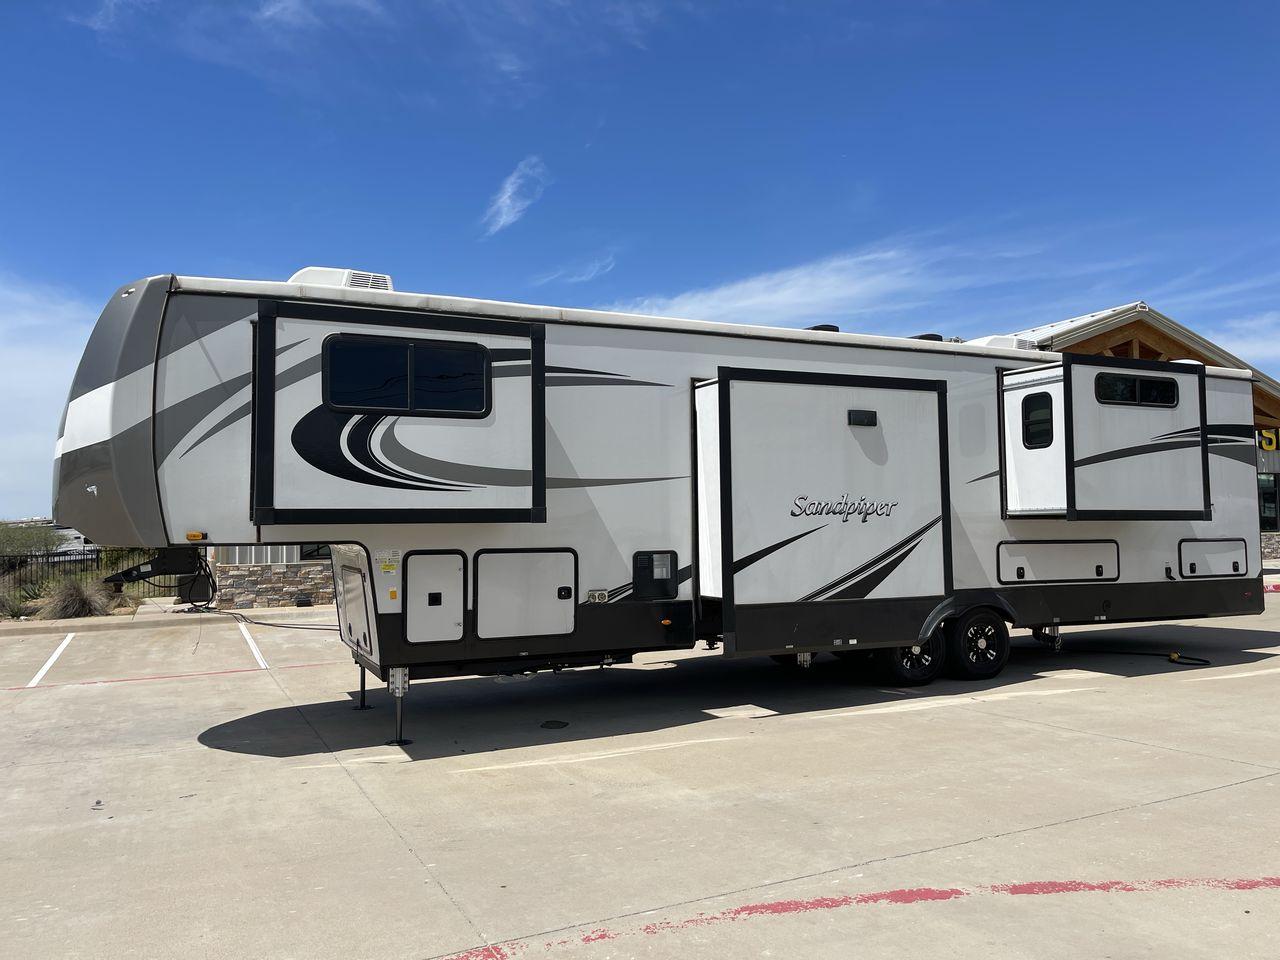 2022 FOREST RIVER SANDPIPER 391FLRB (4X4FSAR26NJ) , Length: 43.5 ft. | Dry Weight: 13,009 lbs | Gross Weight: 16,009 lbs | Slides: 5 transmission, located at 4319 N Main Street, Cleburne, TX, 76033, (817) 221-0660, 32.435829, -97.384178 - The 2022 Forest River Sandpiper 391FLRB is elegance meets adventure in the great outdoors. This fifth wheel, standing at 43.5 feet tall and featuring an aluminum body and fiberglass sides, is a symbol of durability and style on the road. It weighs 13,009 lbs. dry and can carry up to 16,009 lbs gross - Photo #25